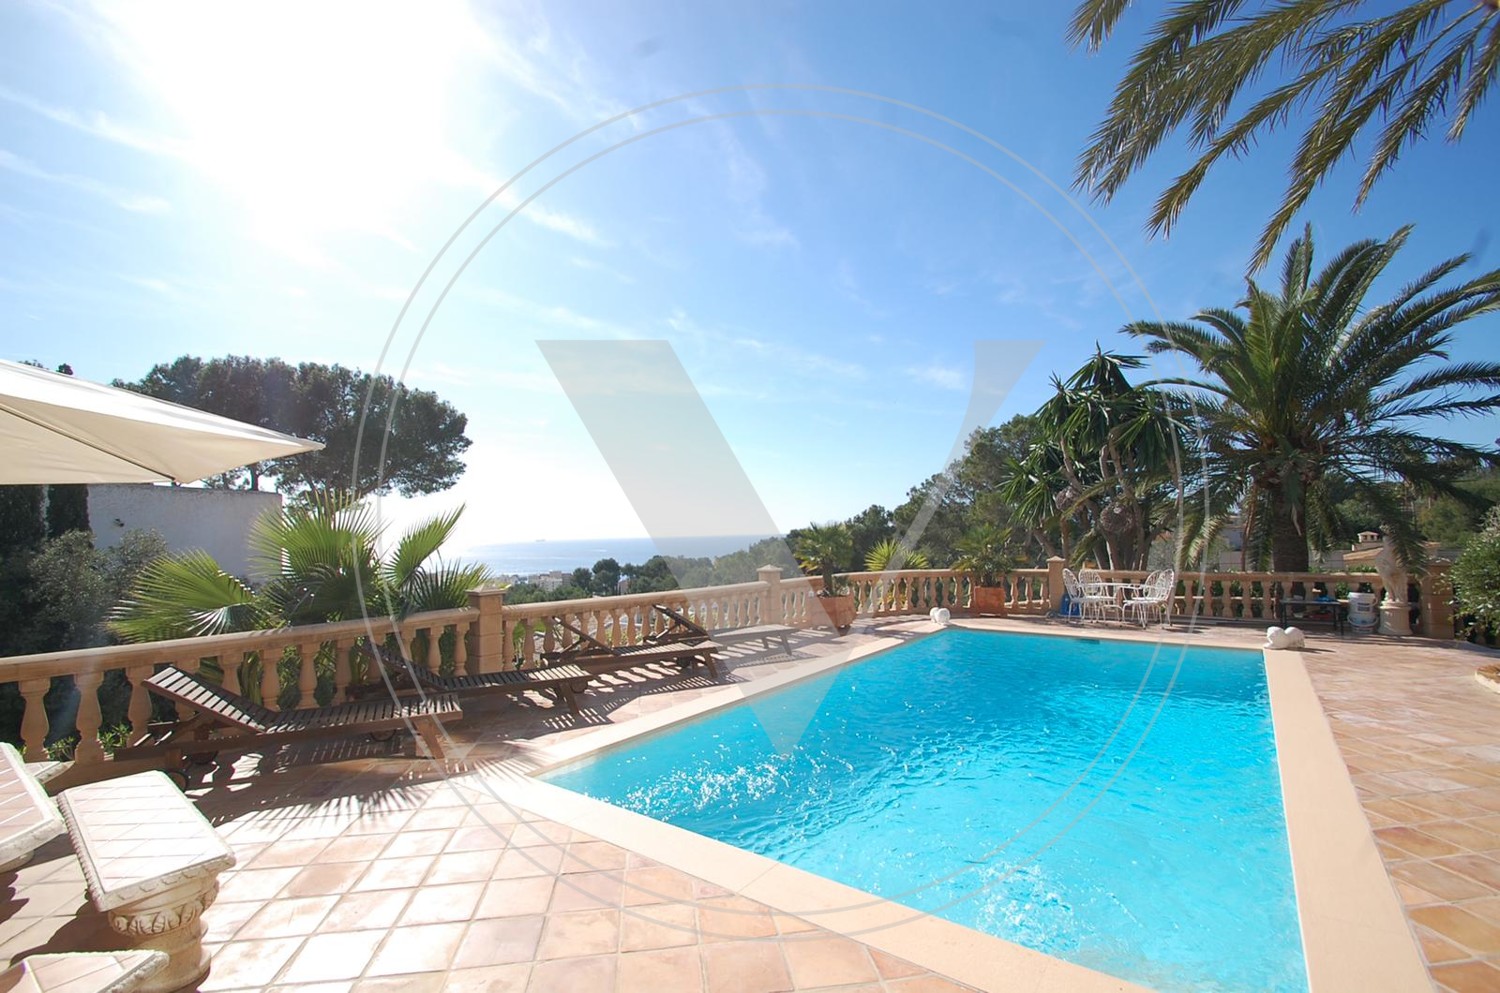 Beautiful villa For sale in Costa Den Blanes, just only 5 minutes to Portals.